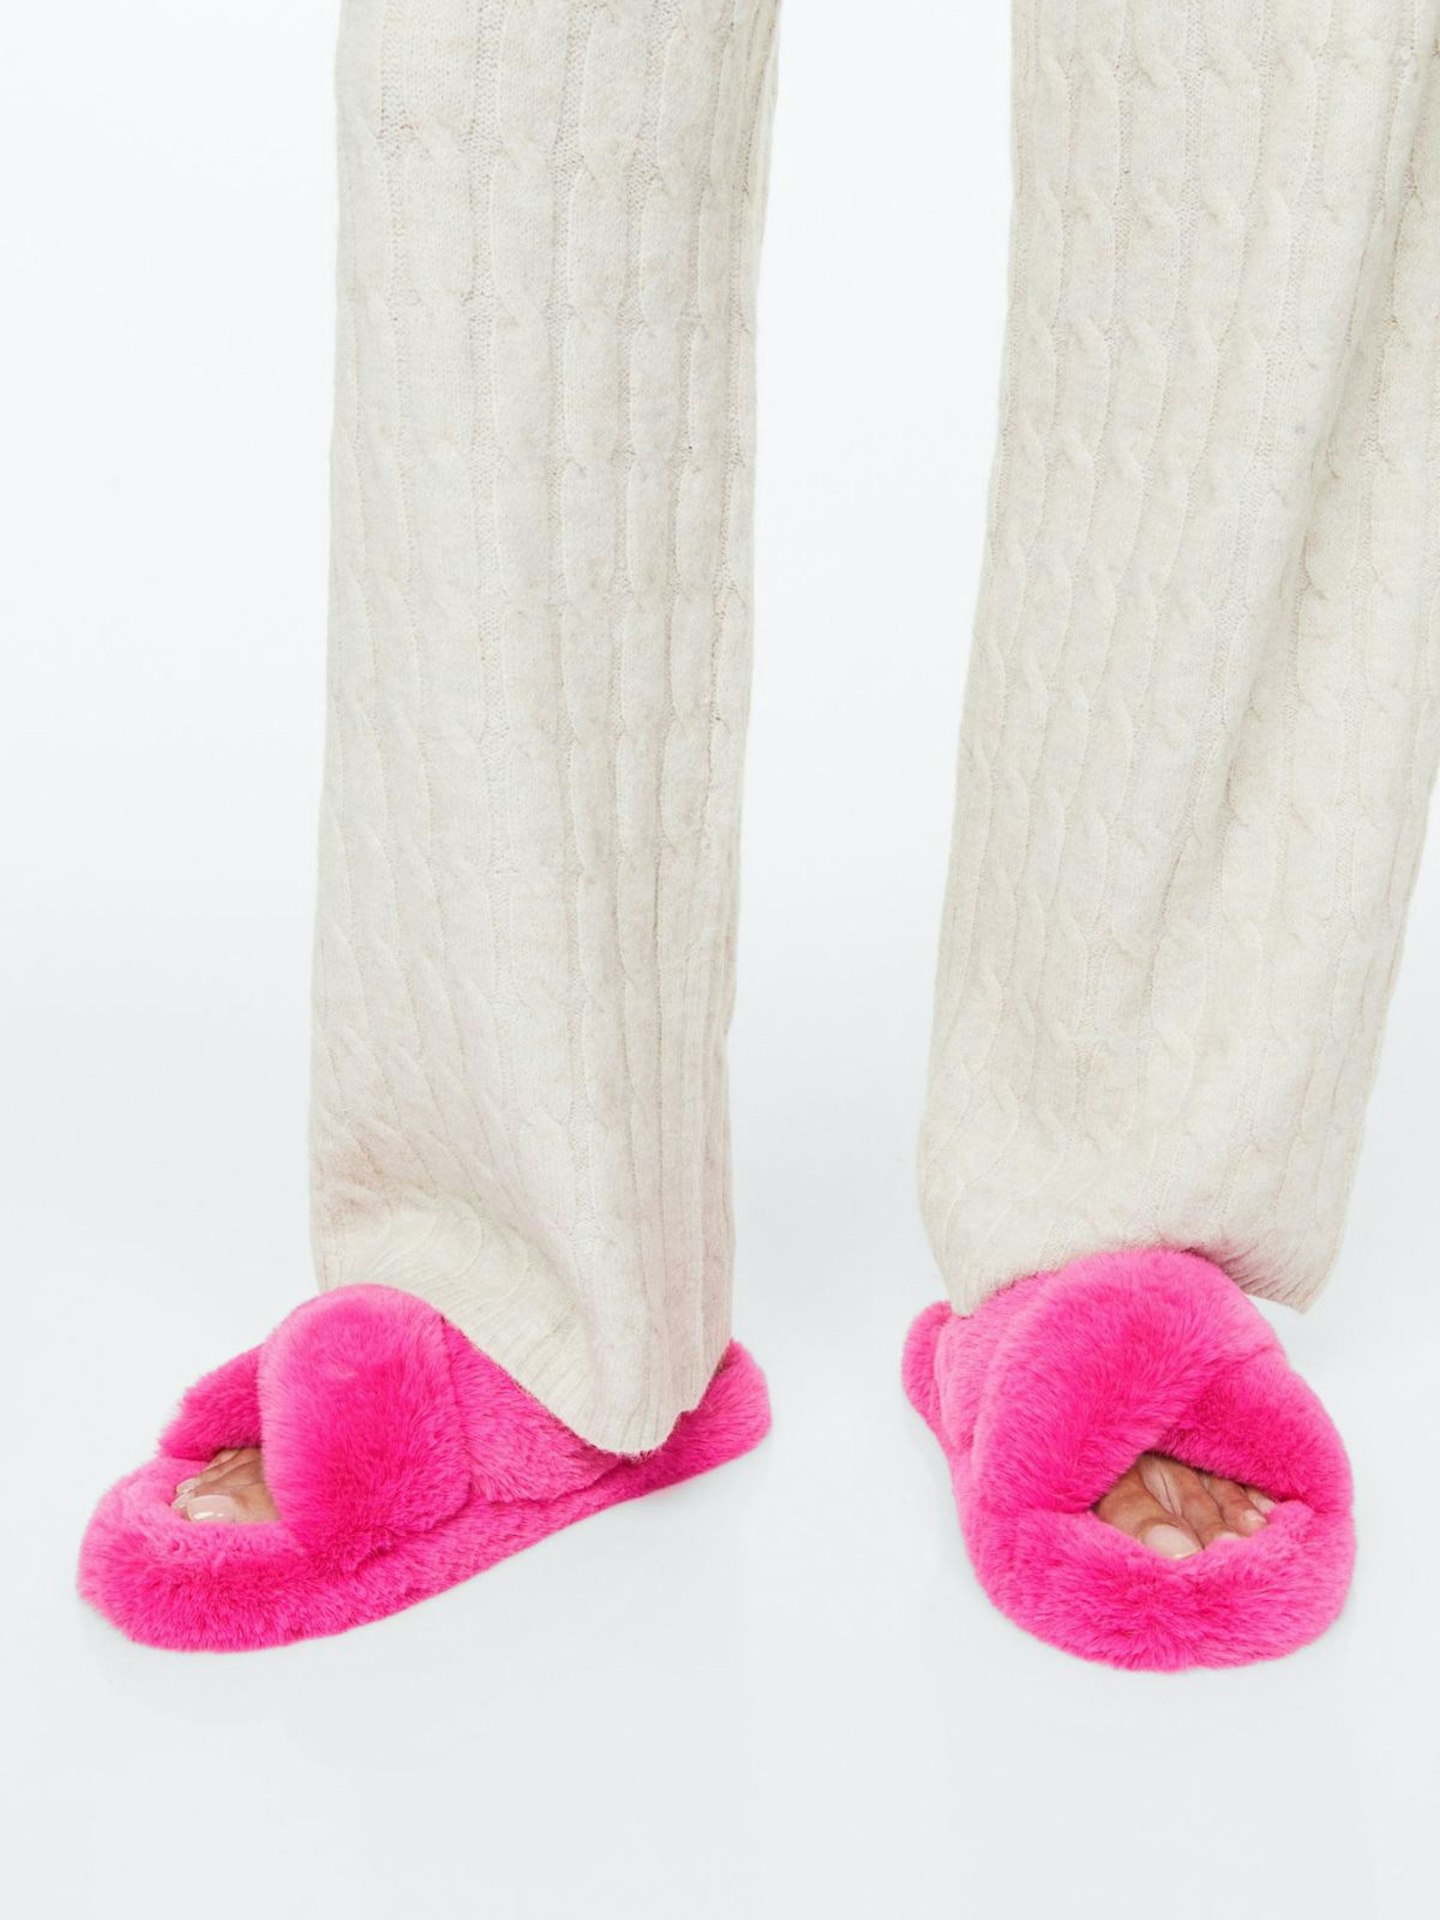 H&M Pink Fluffy Slippers